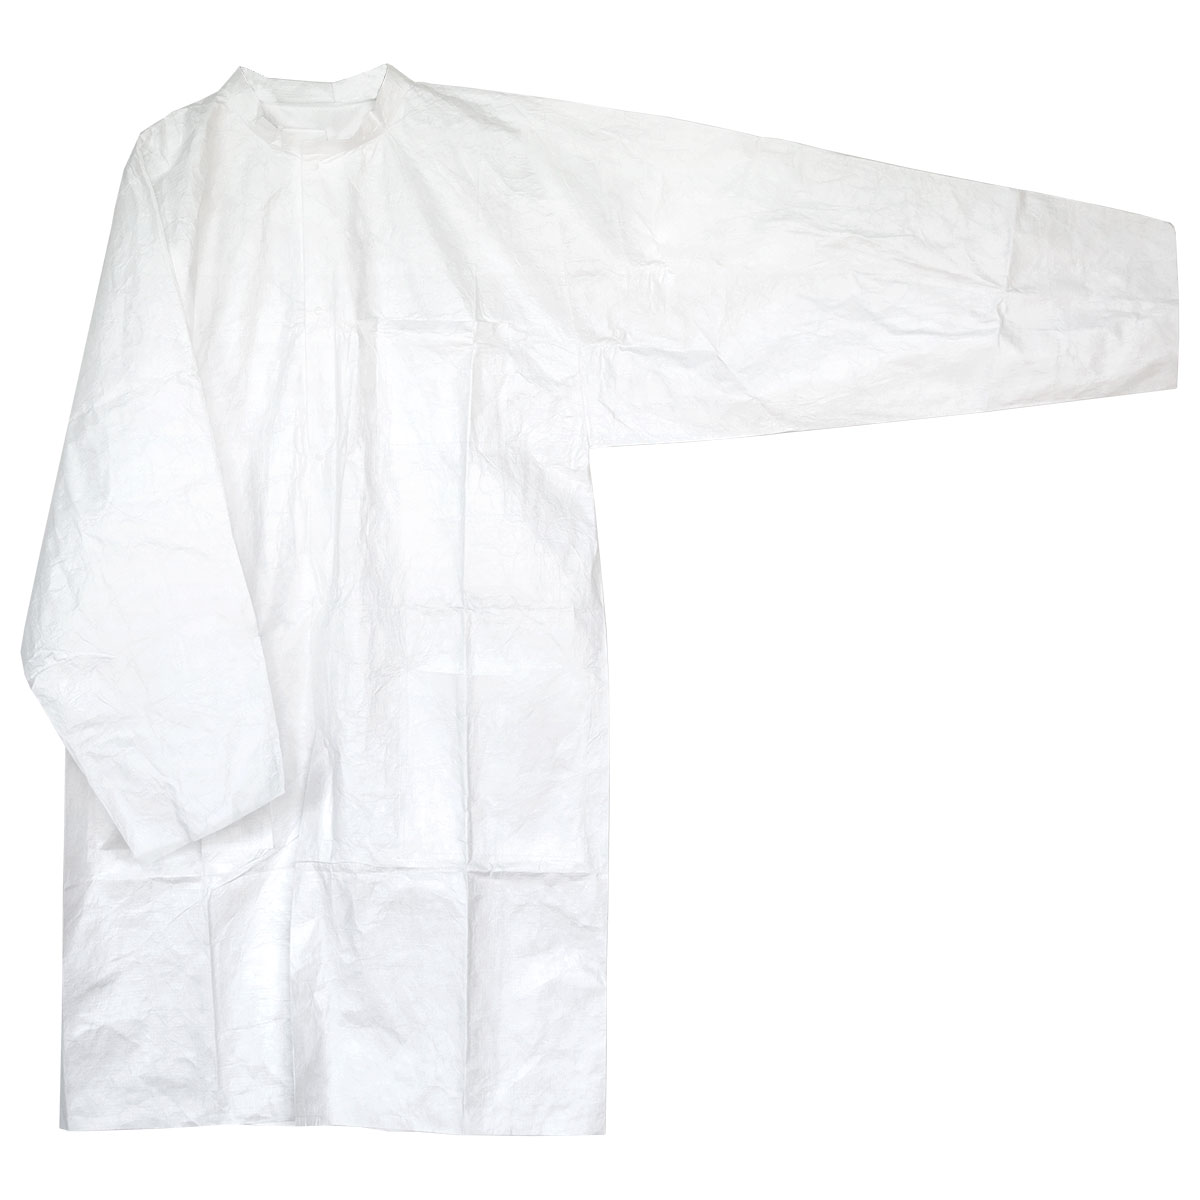 Disposable coat, white, XXL, breathable, with press studs